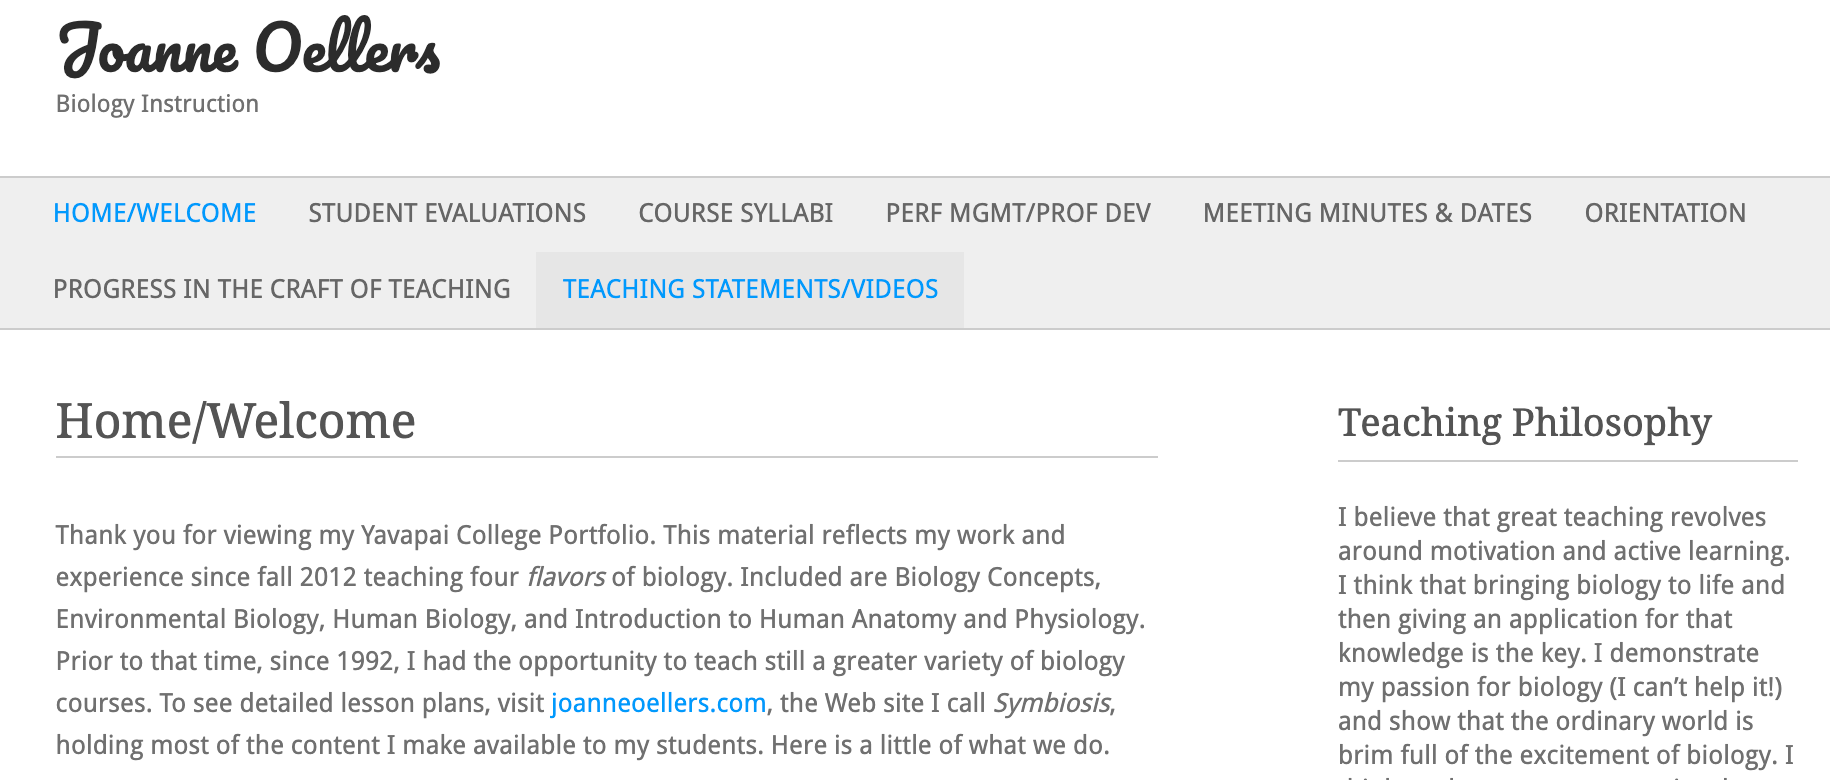 Joanne OOllers website homepage. Site includes links to various writing, classes, reflections, and student surveys.